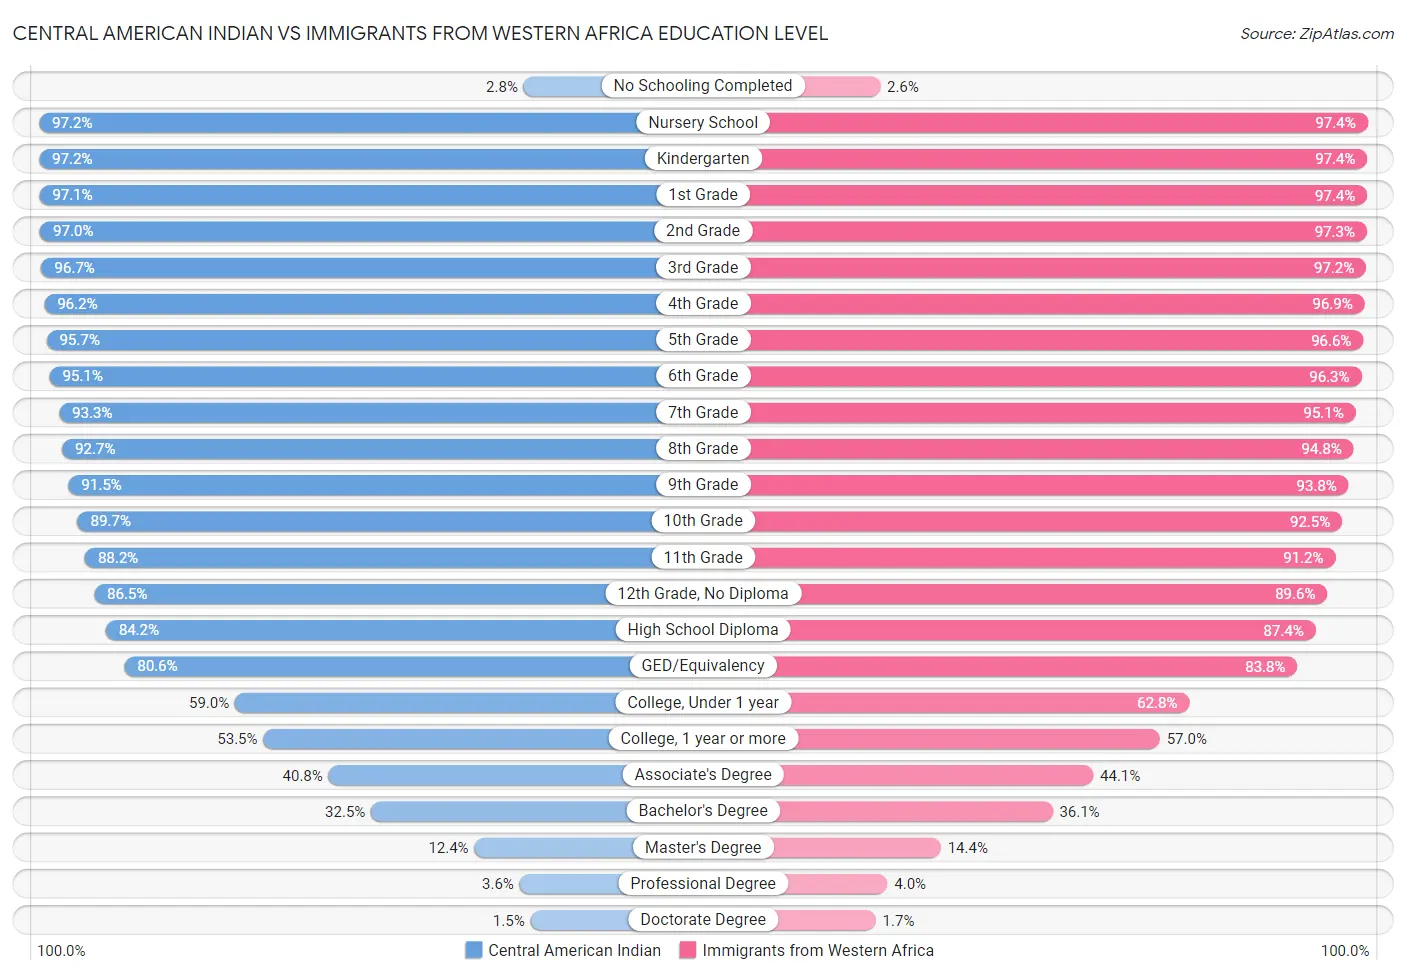 Central American Indian vs Immigrants from Western Africa Education Level